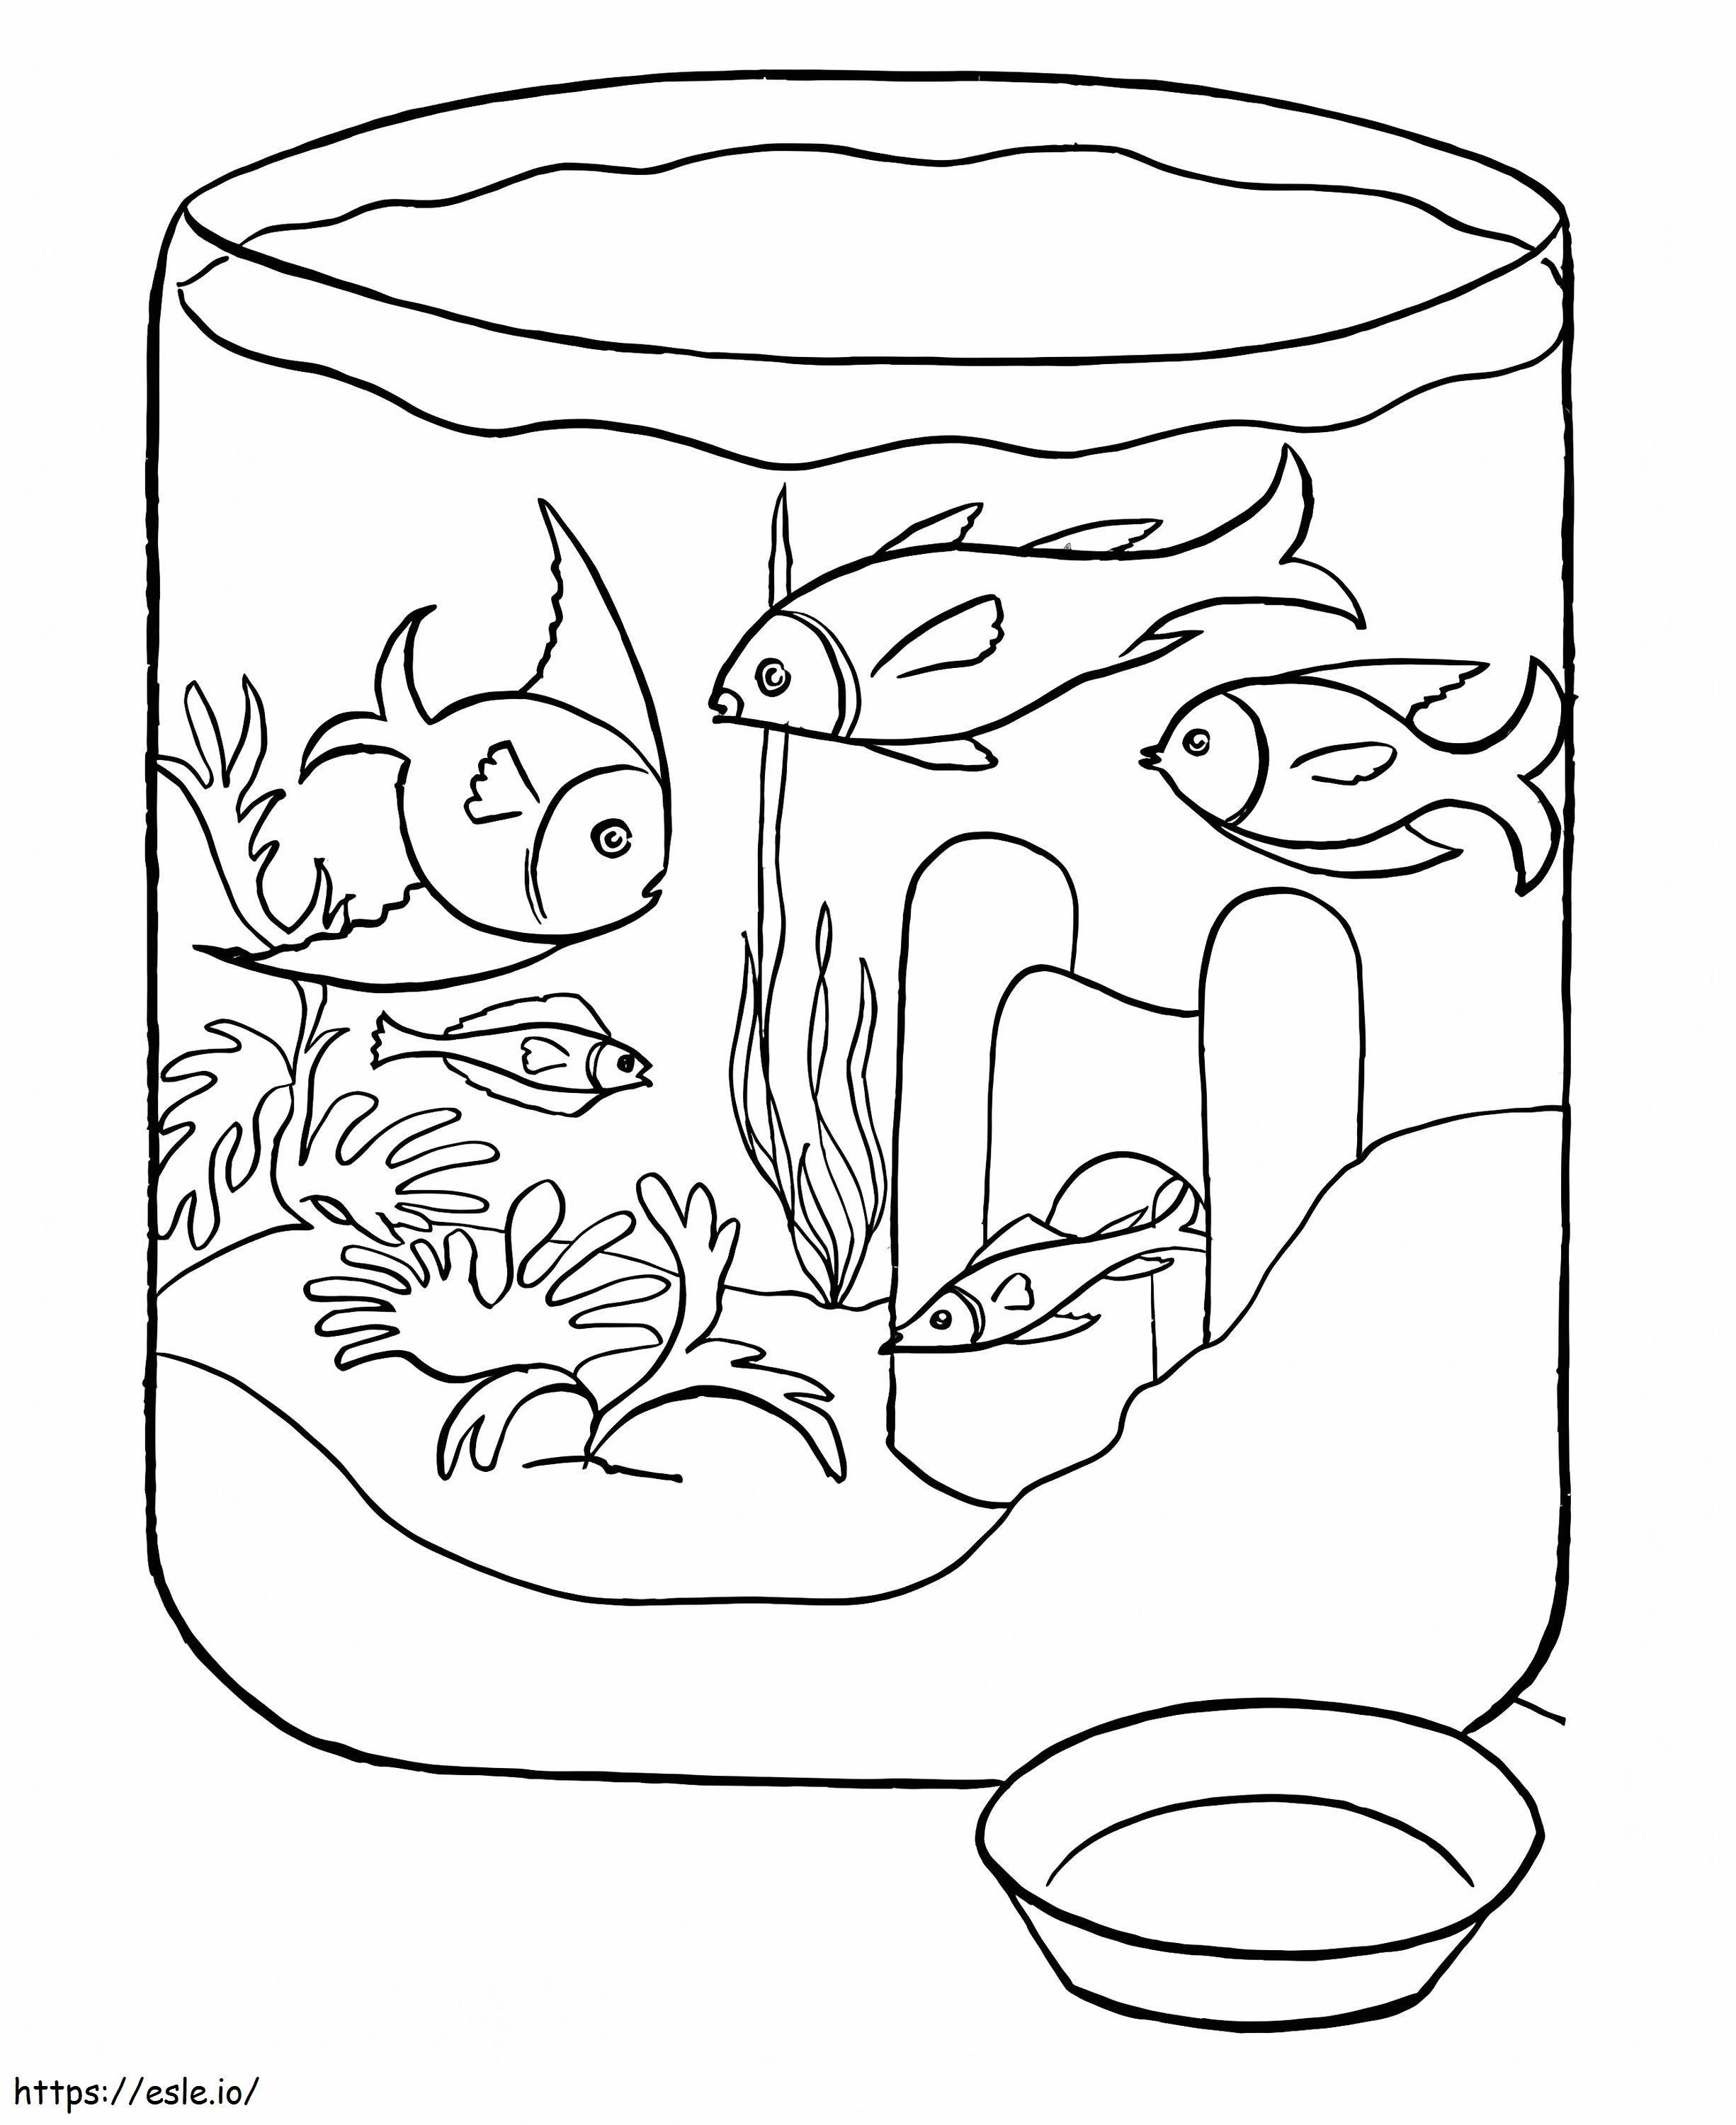 Farmed Fish Coloring coloring page